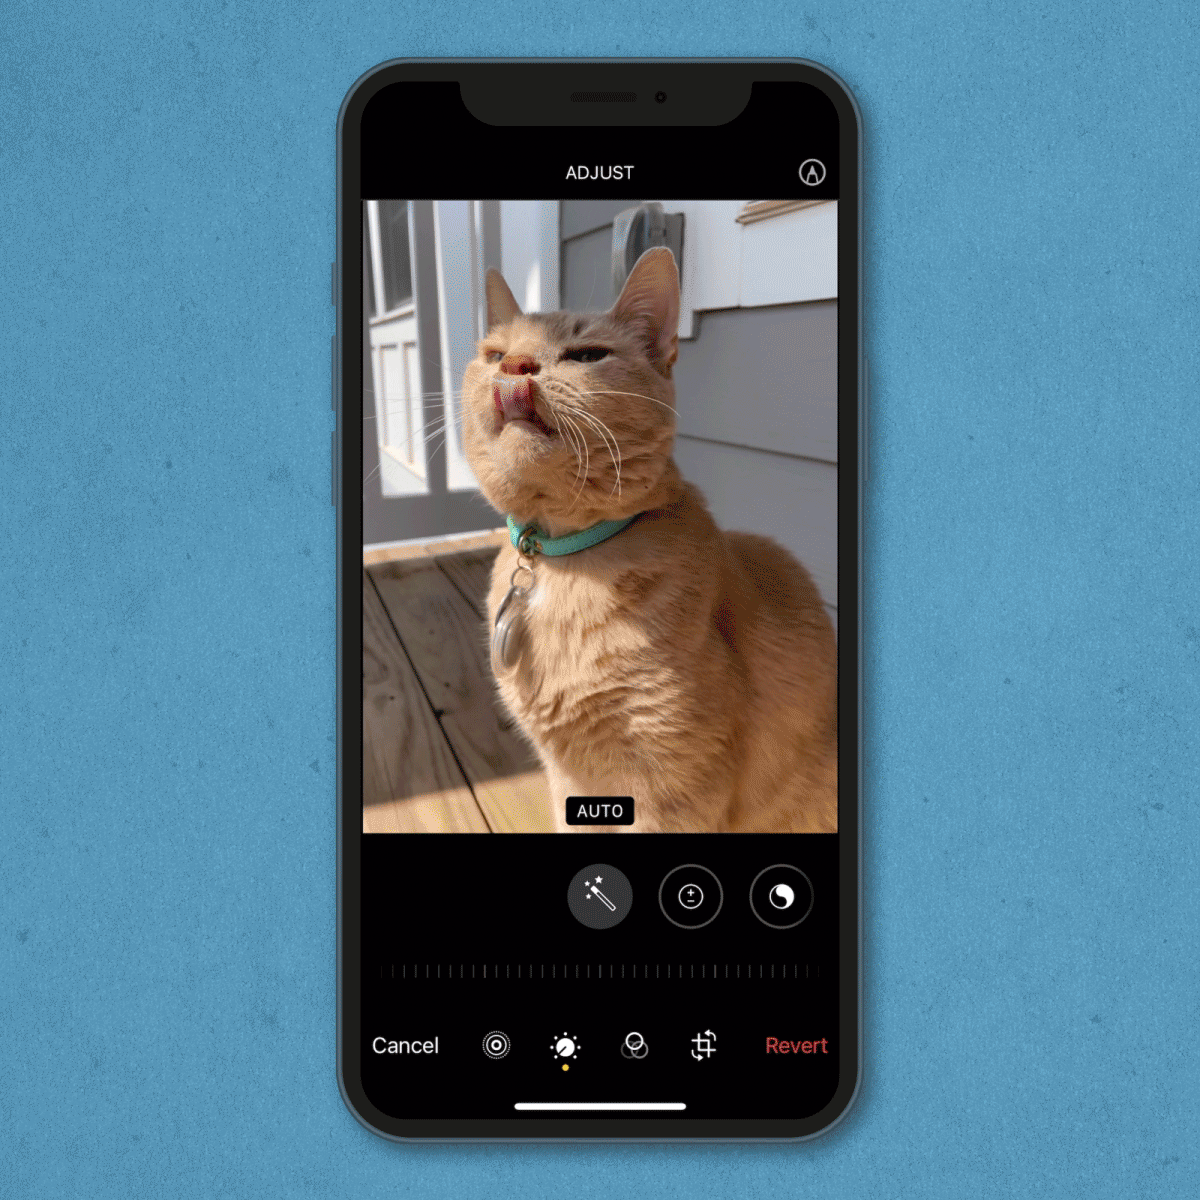 gif showing how to auto enhance a photo on an iPhone